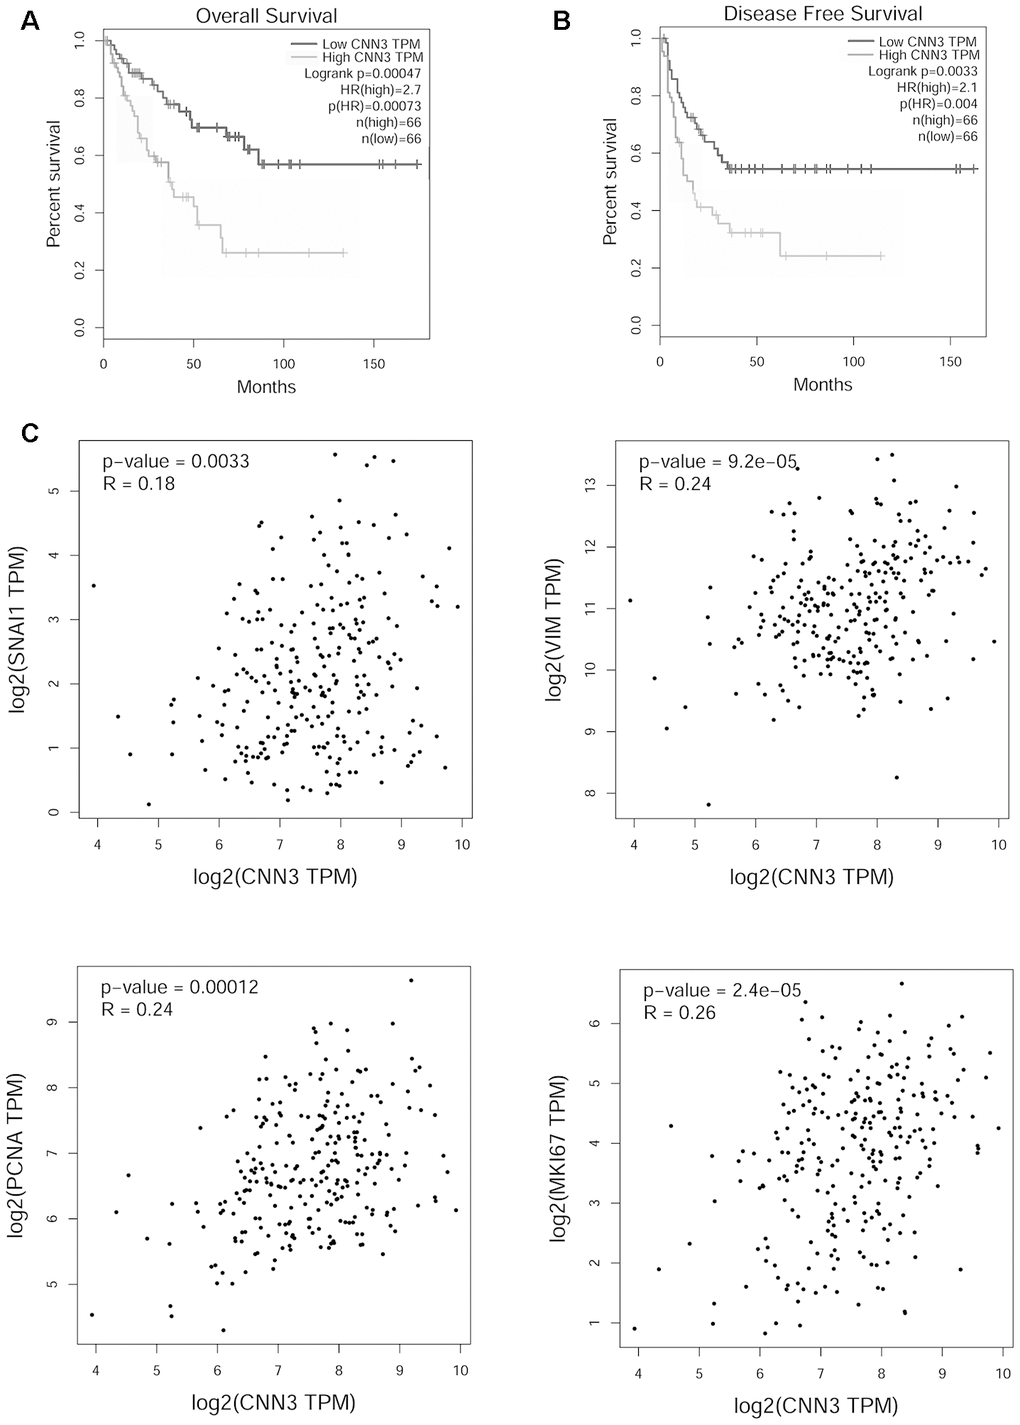 Functional analysis of CNN3 in TCGA sarcoma cohort analyzed using GEPIA. (A, B) Correlation between CNN3 mRNA levels and prognosis. (C) Correlation between CNN3 mRNA levels and two mesenchymal markers, Snail and vimentin (VIM), and two tumor proliferation markers, MKI67 and PCNA. TPM: transcripts per million; HR: hazard ratio. The hazard ratio was calculated based on the Cox PH model.